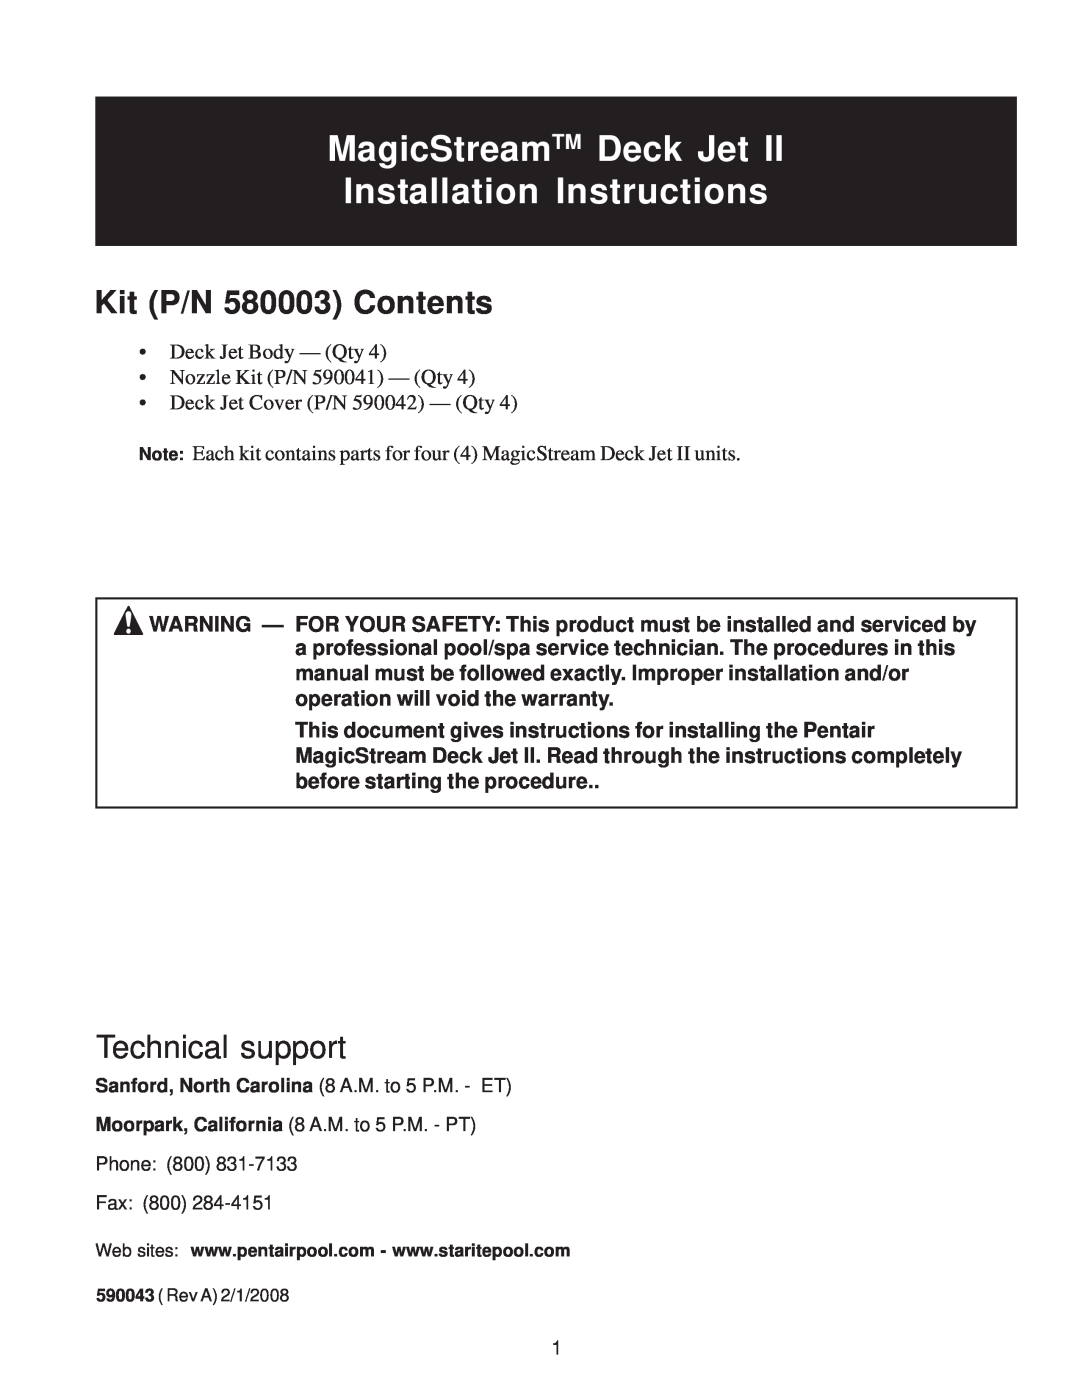 Pentair installation instructions Kit P/N 580003 Contents, MagicStreamTM Deck Jet Installation Instructions 